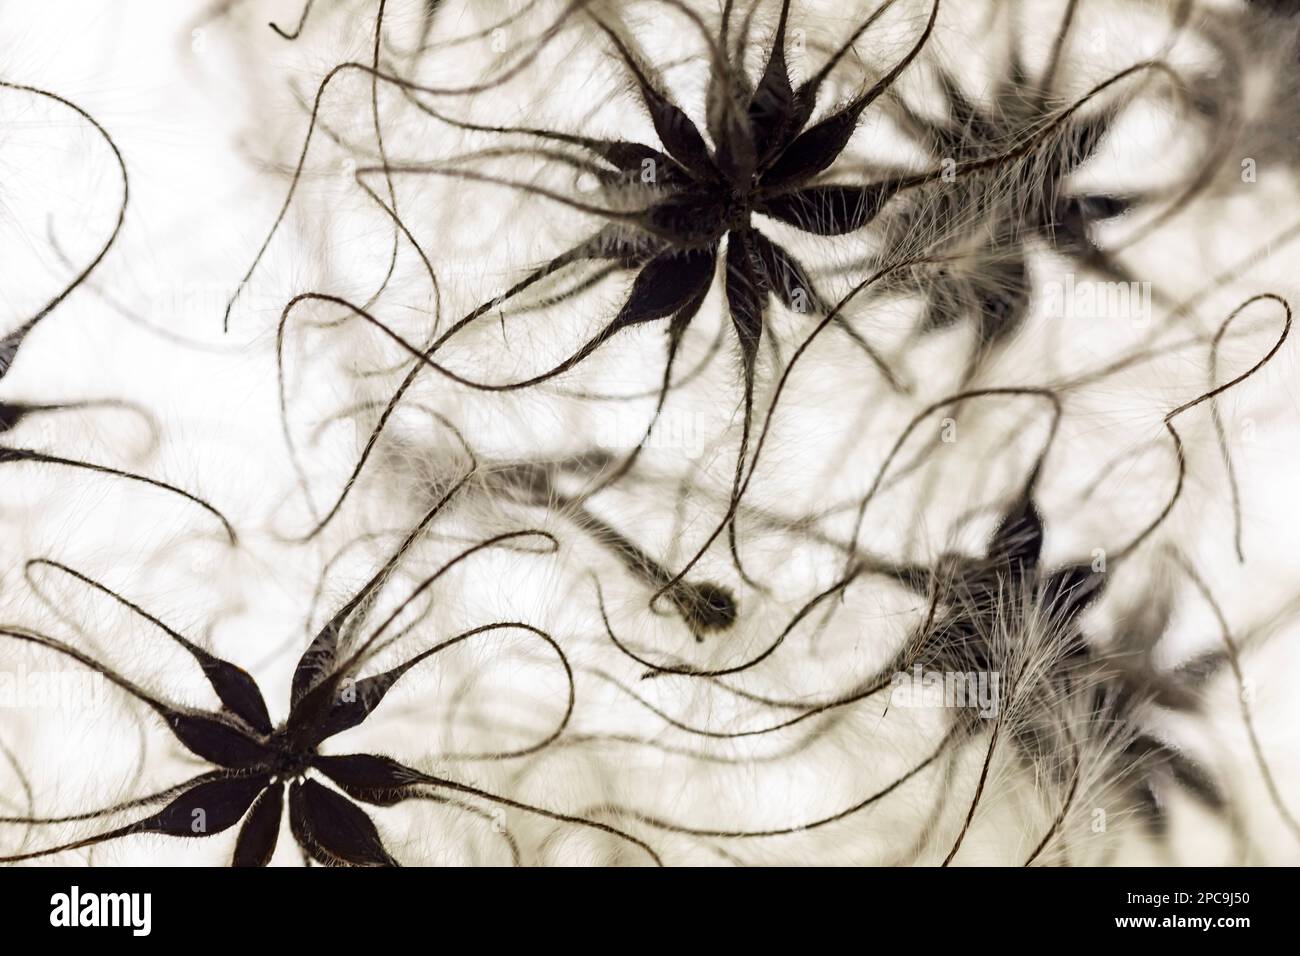 WA23253-00...WASHINGTON - Open seed pods surrounded by numerous feathers, promising some wind dispersal. Stock Photo